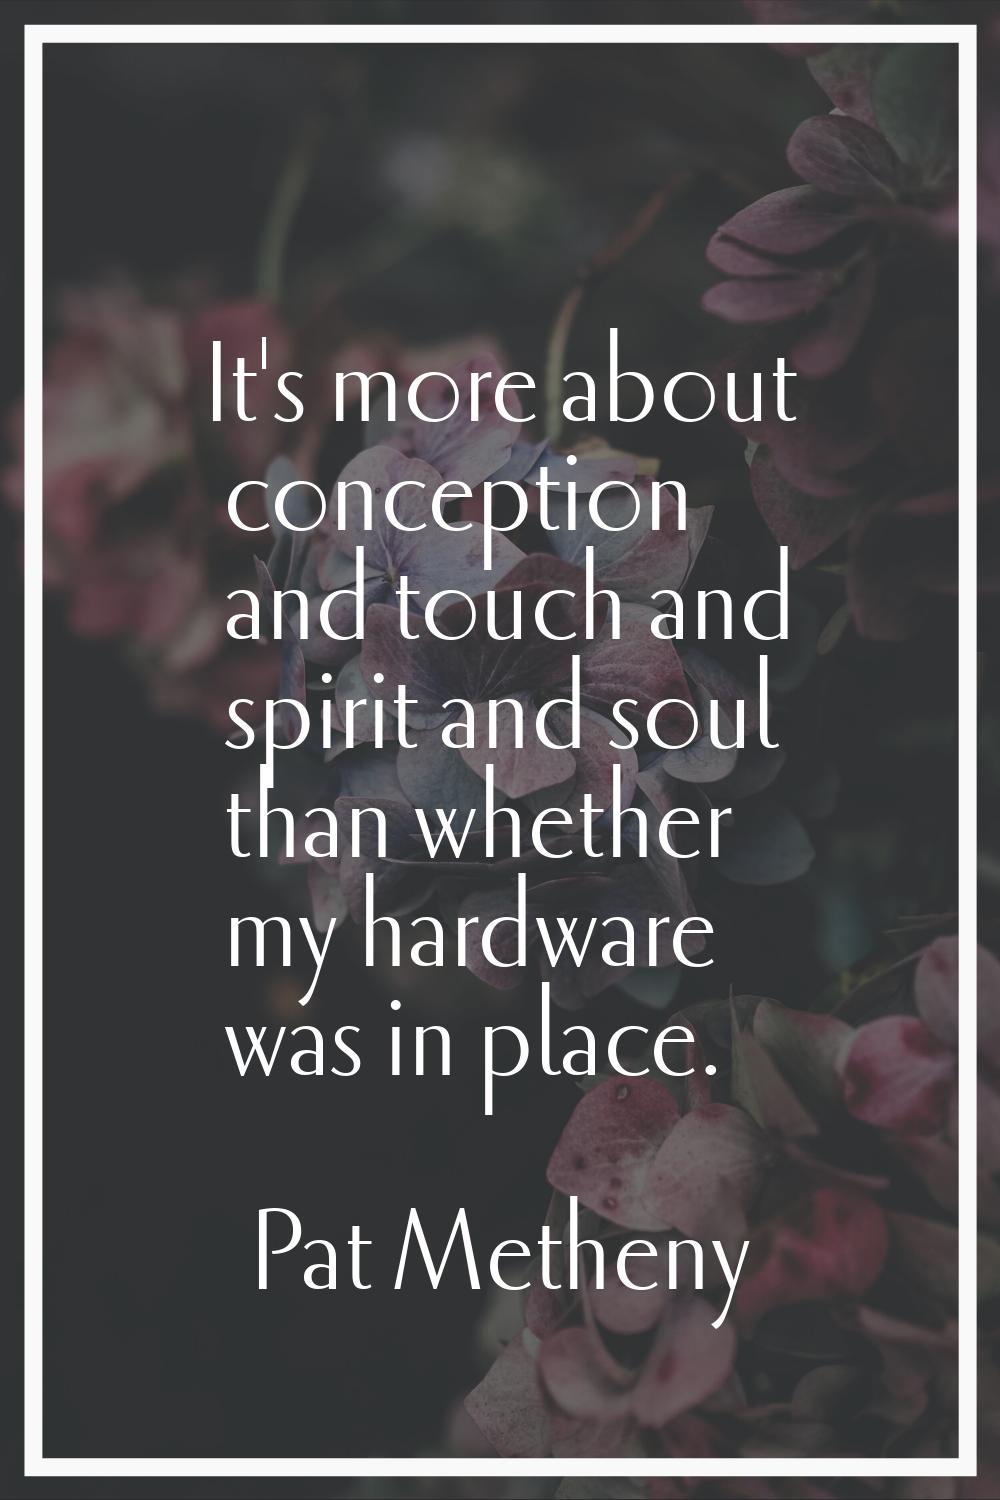 It's more about conception and touch and spirit and soul than whether my hardware was in place.